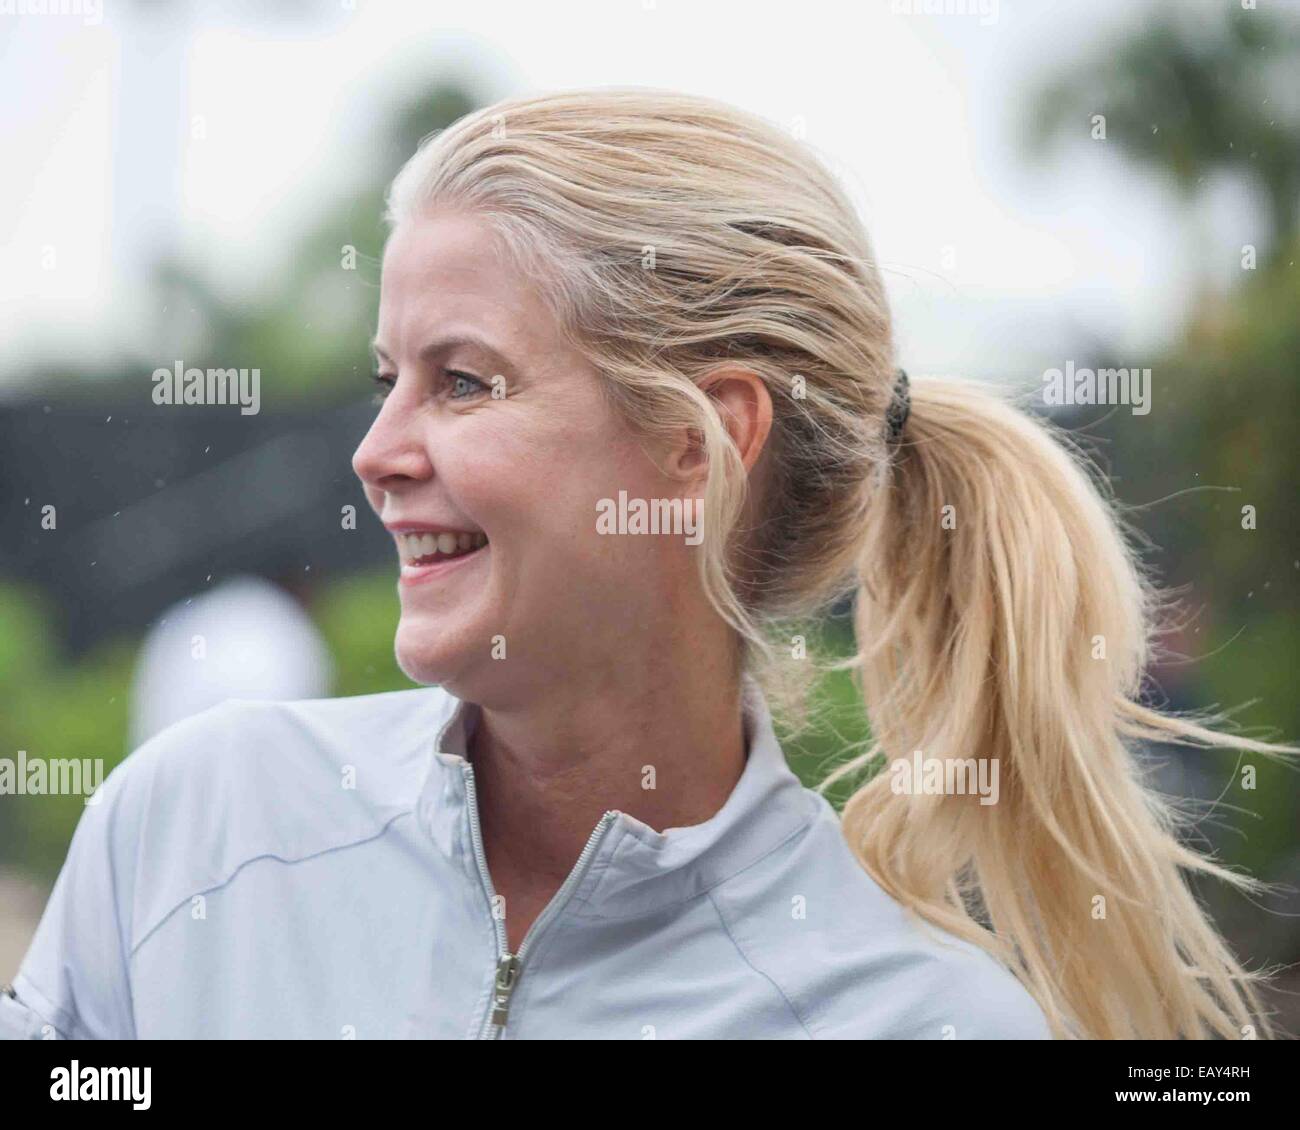 Boca Raton, Florida, US. 21st Nov, 2014. Portrait of MAEVE QUINLAN, an American actress and former professional tennis player, at the Boca Raton Resort & Club, Boca Raton, Florida for the Tennis With Chrissie & Friends.Media Event. Credit:  Arnold Drapkin/ZUMA Wire/Alamy Live News Stock Photo